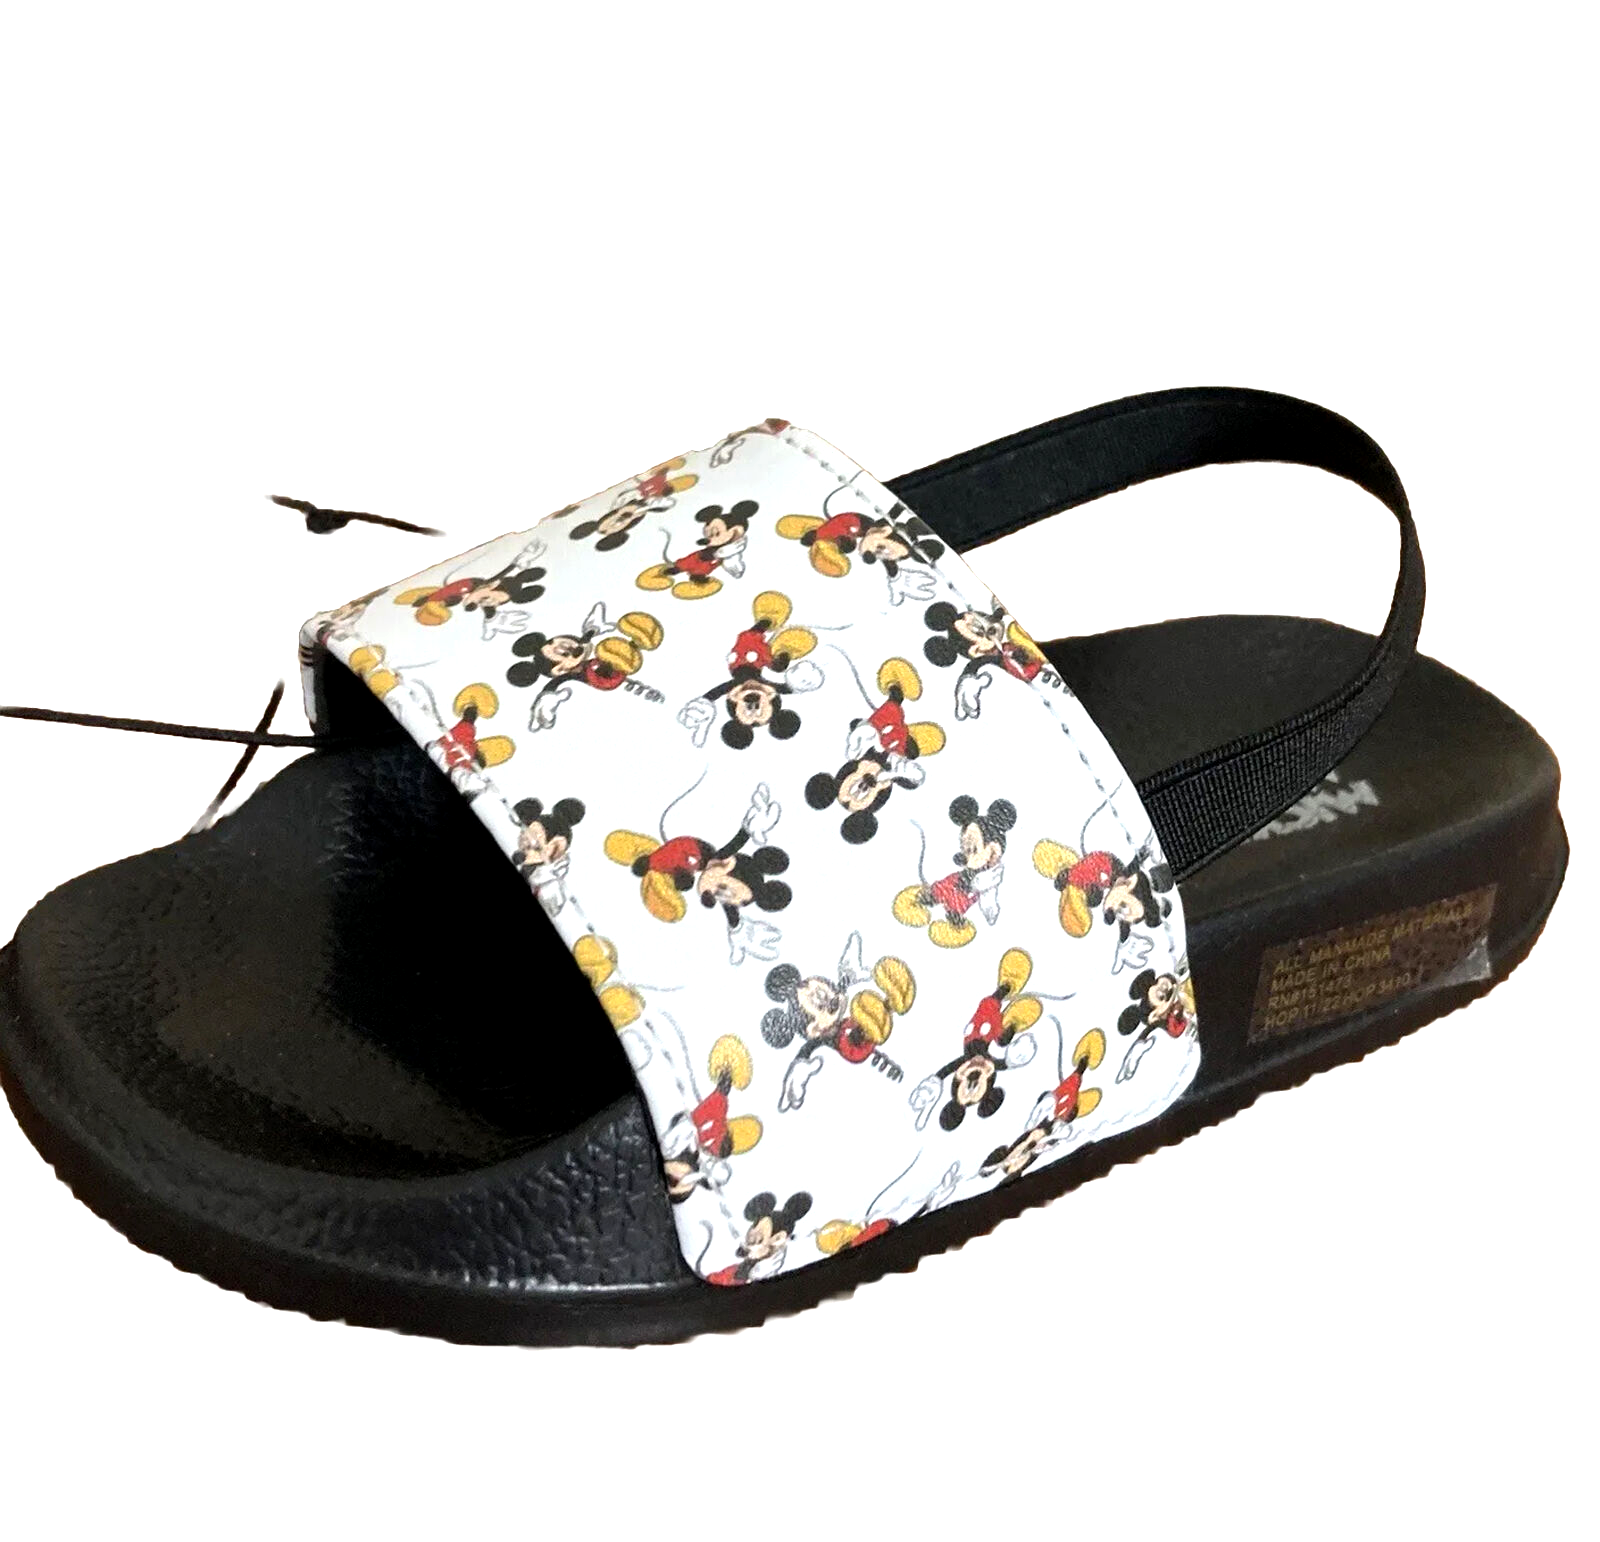 Primary image for Disney Mickey Mouse Slide Sandals Toddlers Sz 9/10 Black White Strap Lightweight